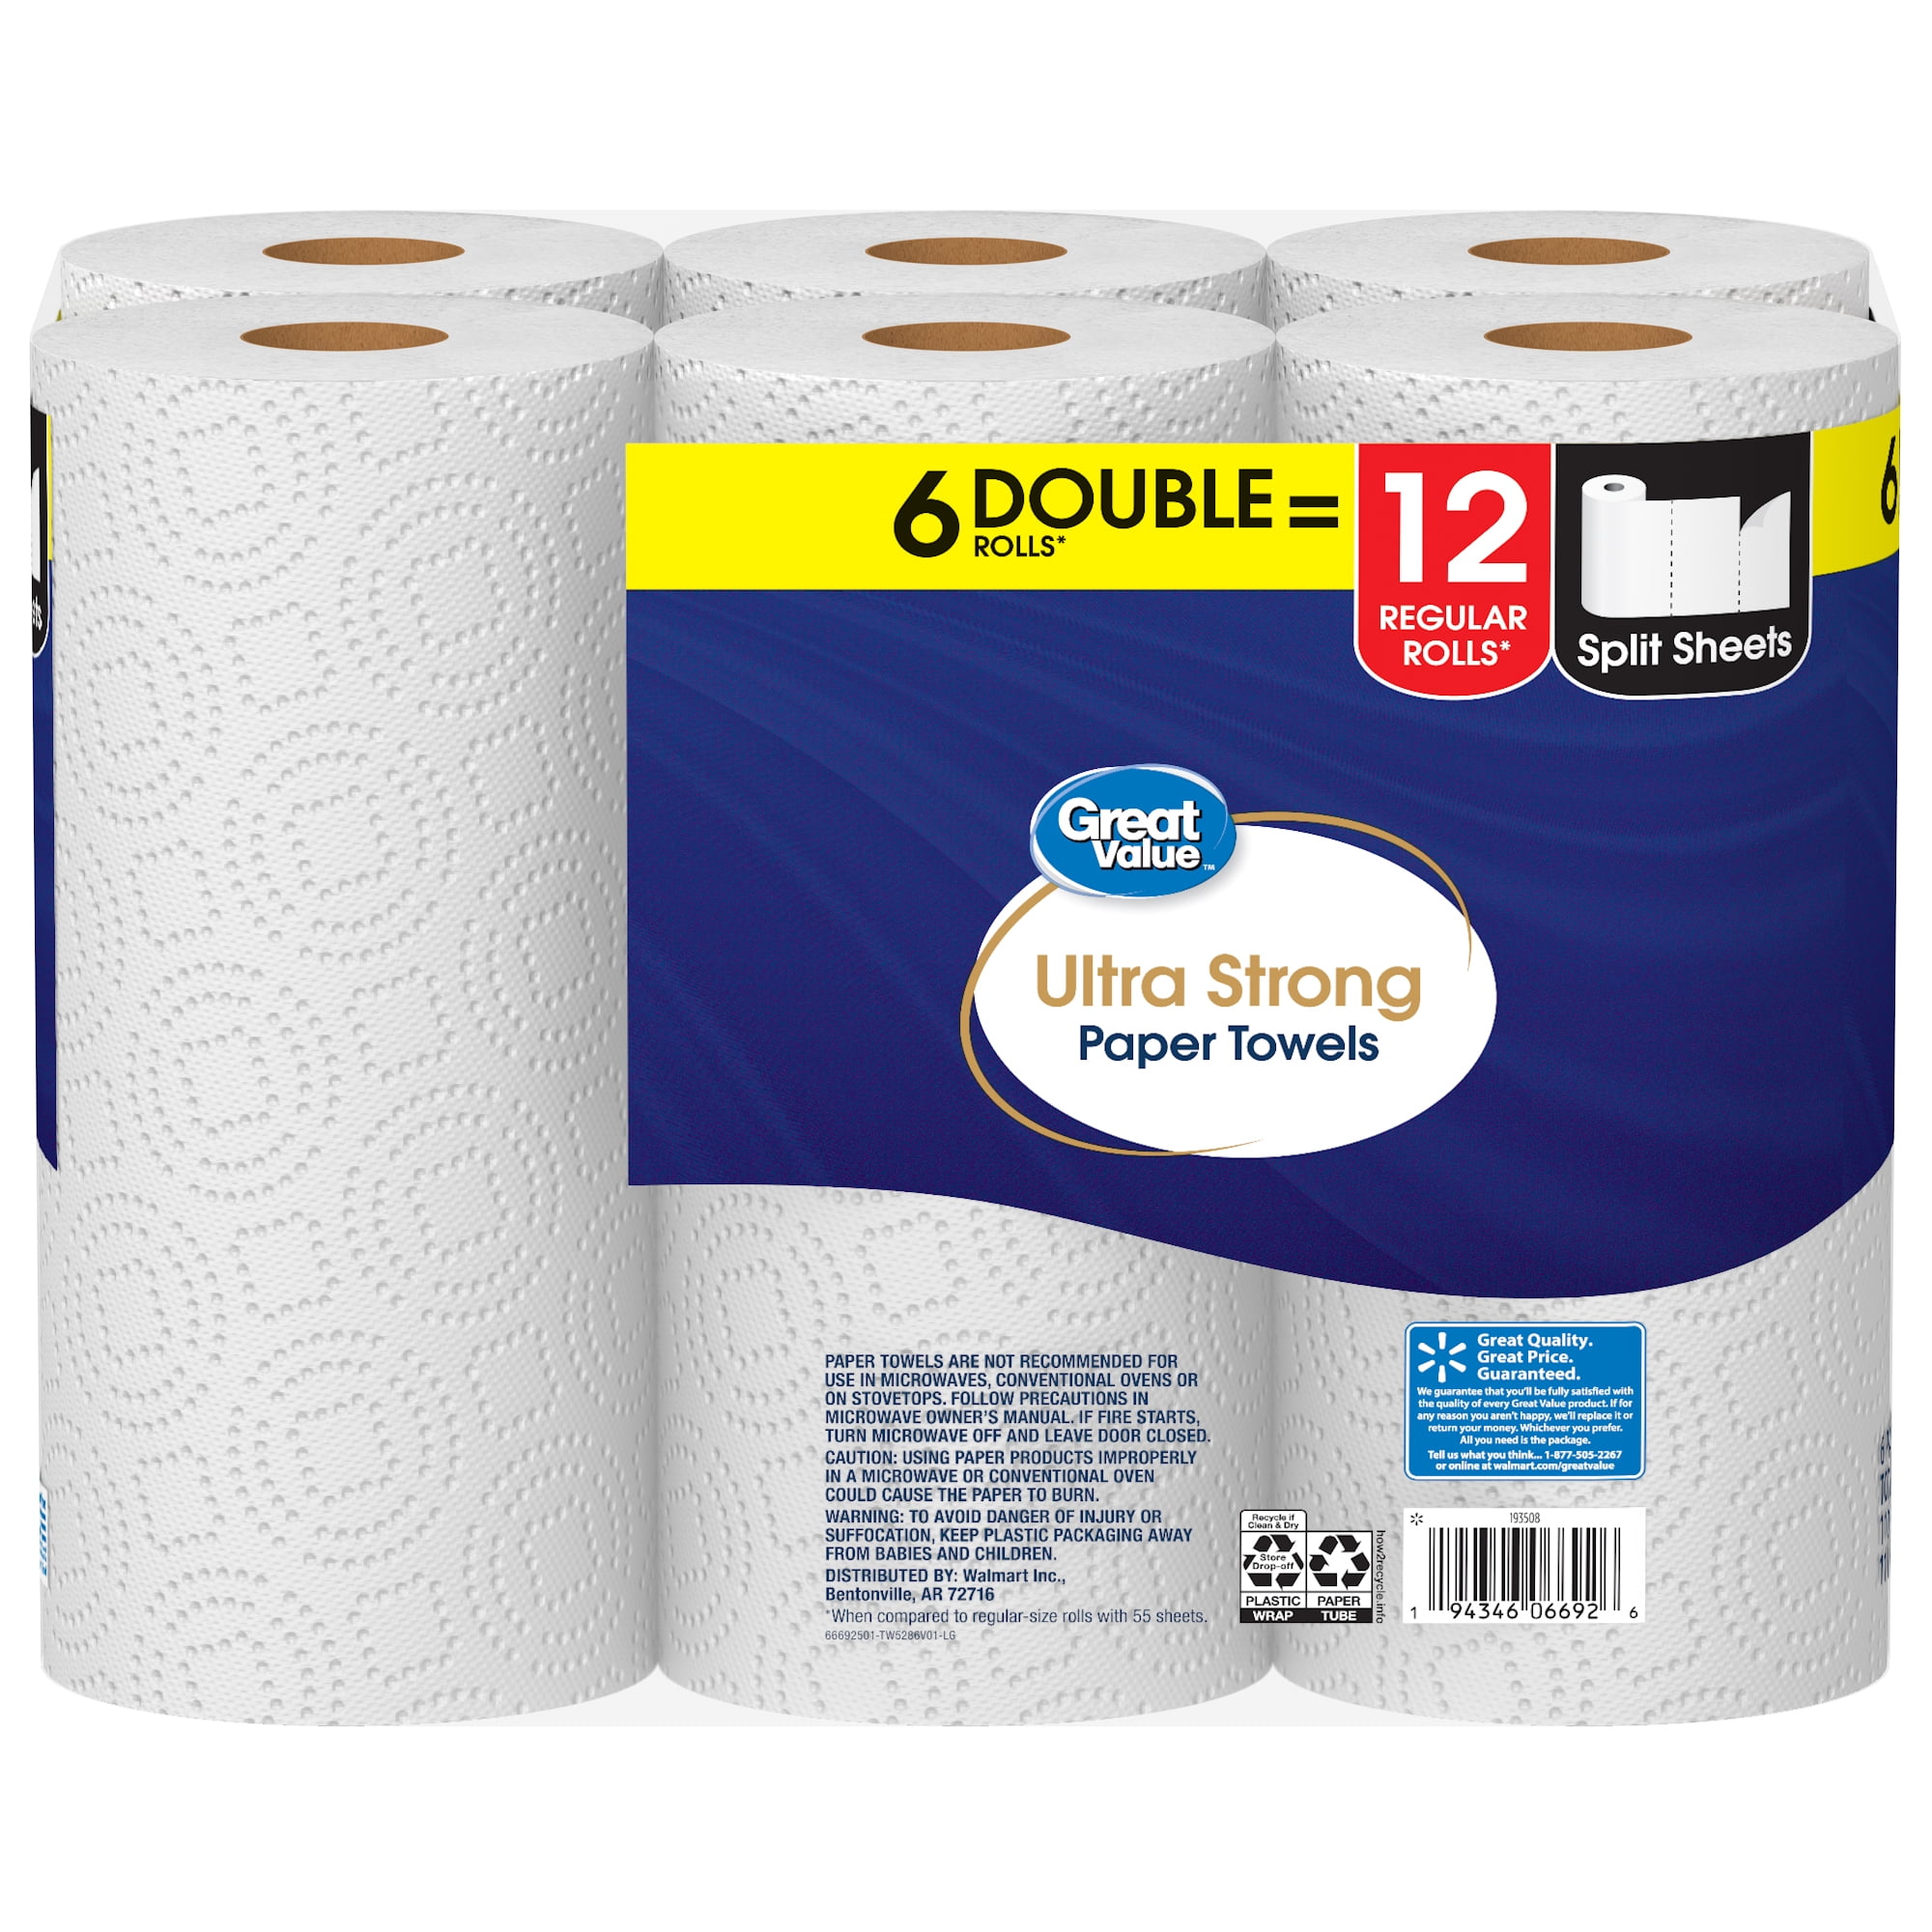 Great Value Ultra Strong Paper Towels, Split Sheets, 2 Double Rolls